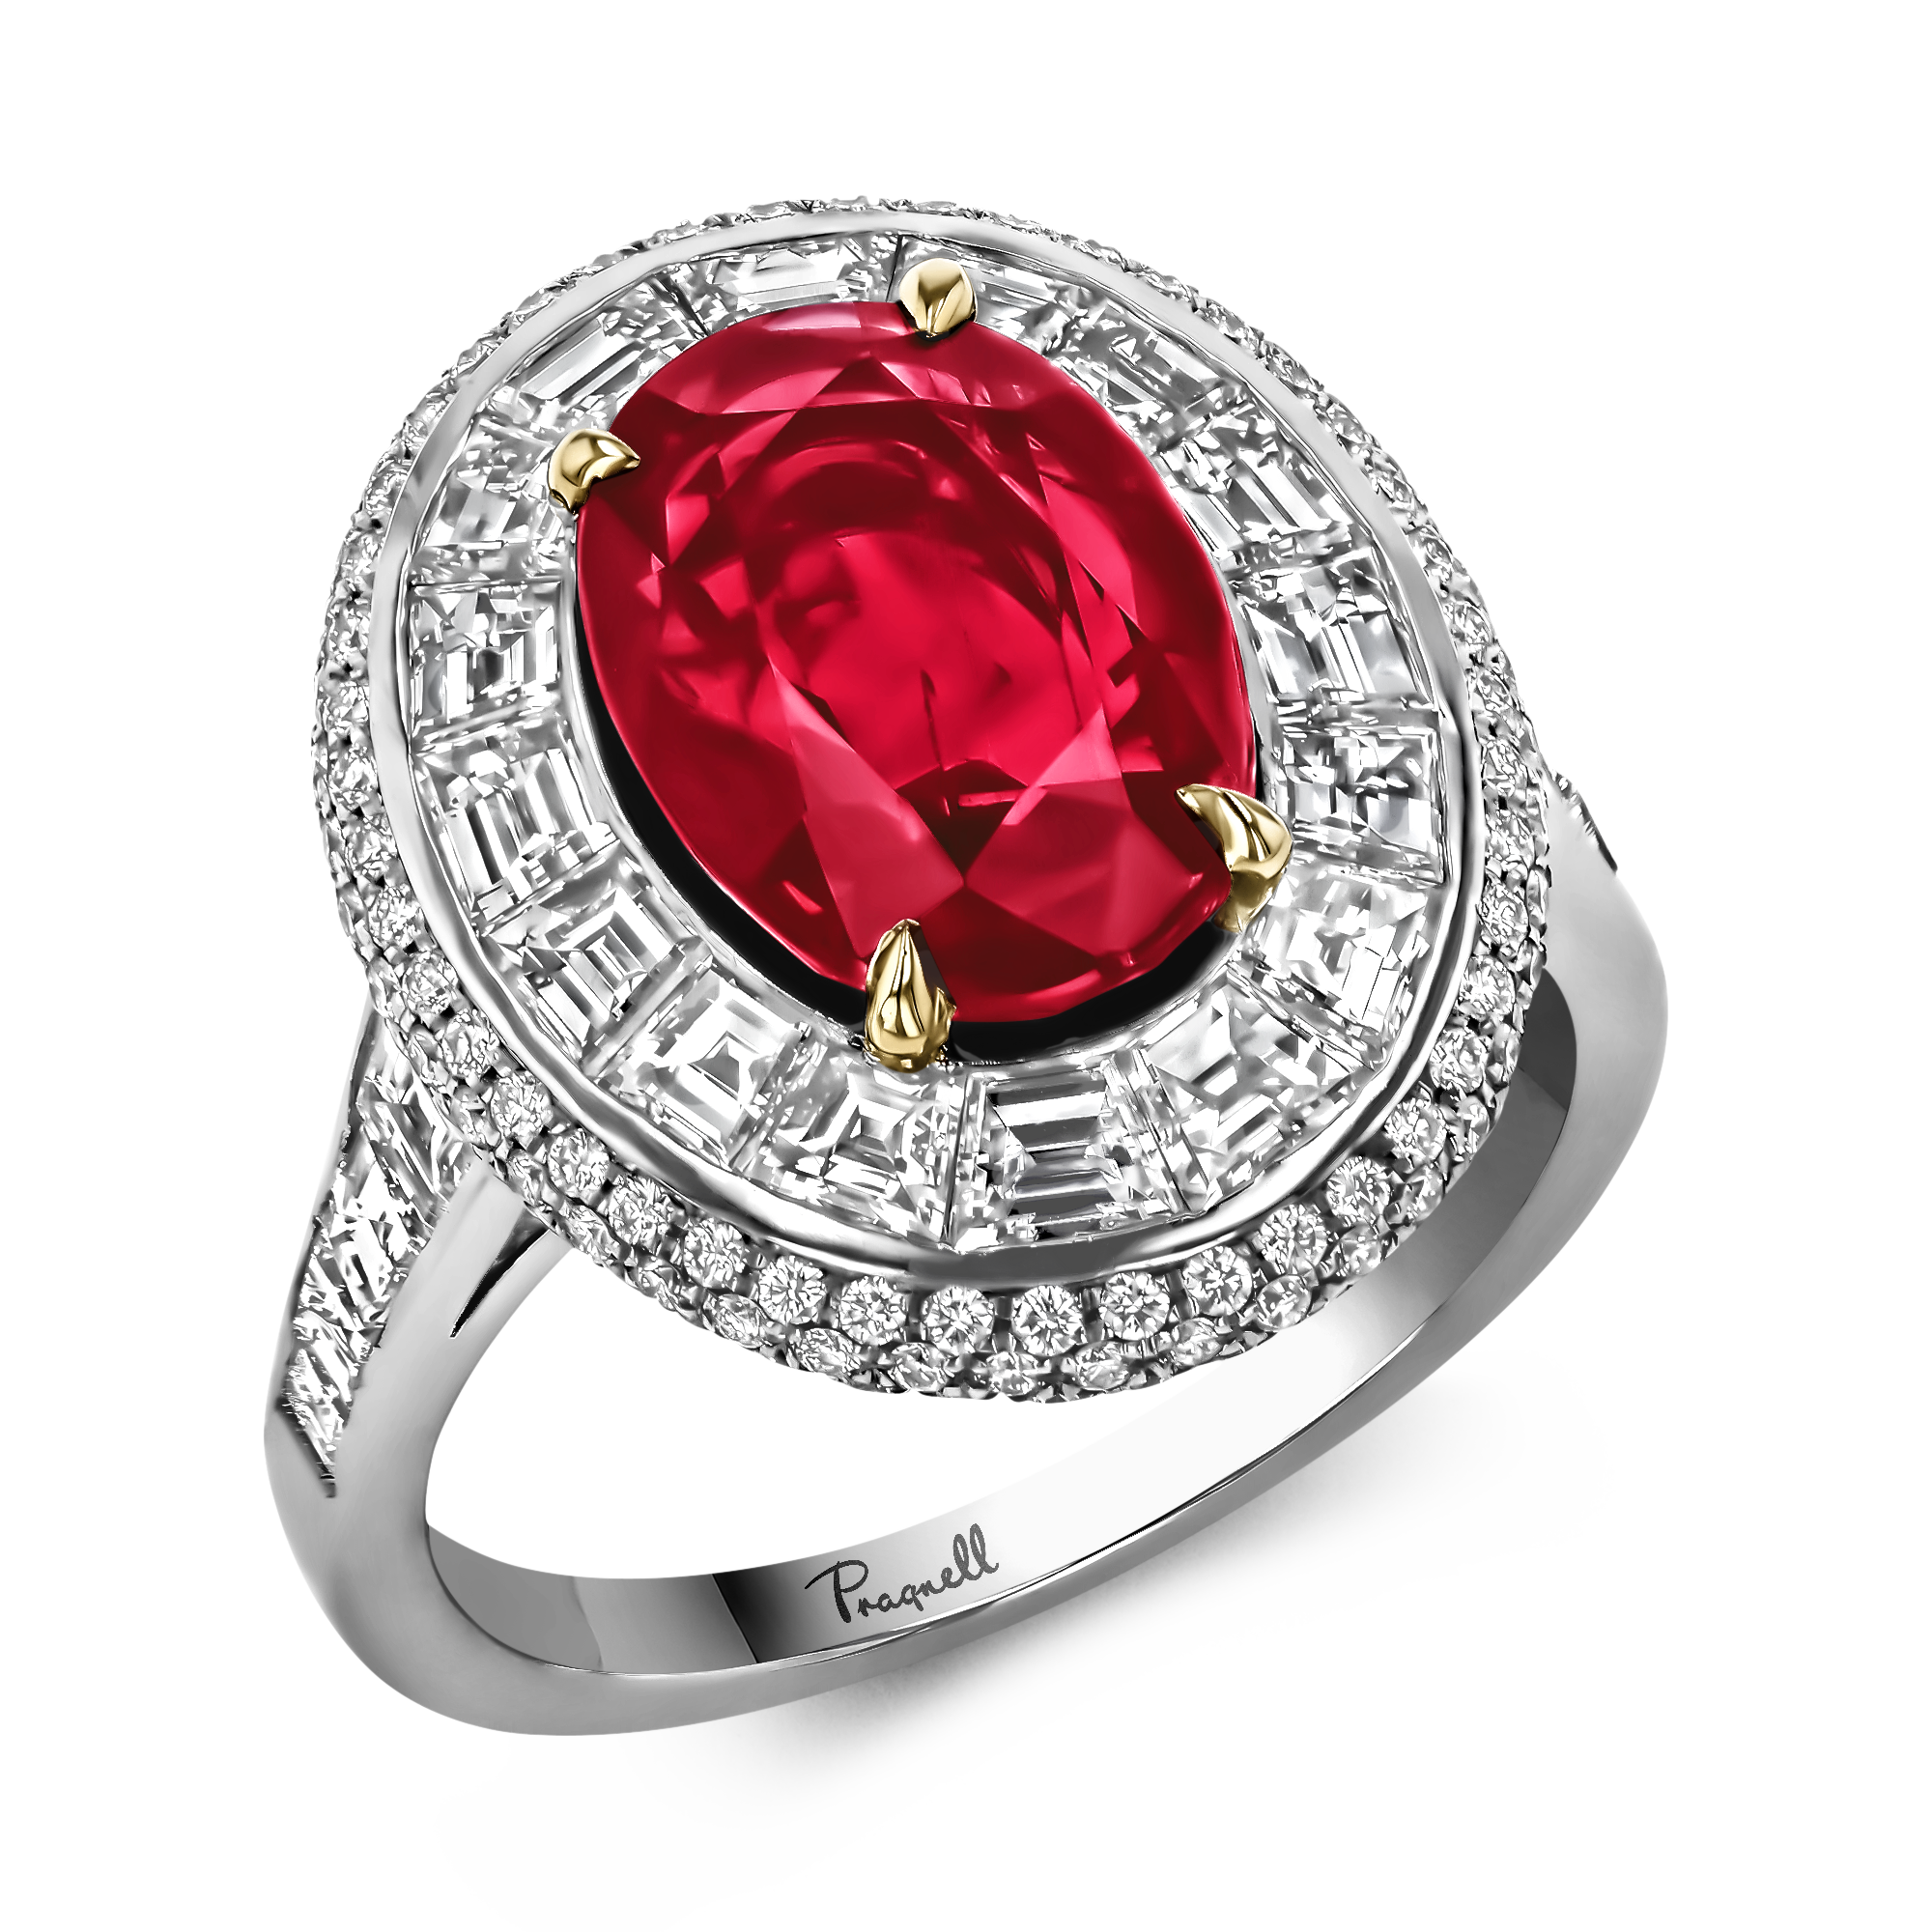 Masterpiece 4.13ct Burmese Ruby and Diamond Cluster Ring Oval Cut, Claw Set_1